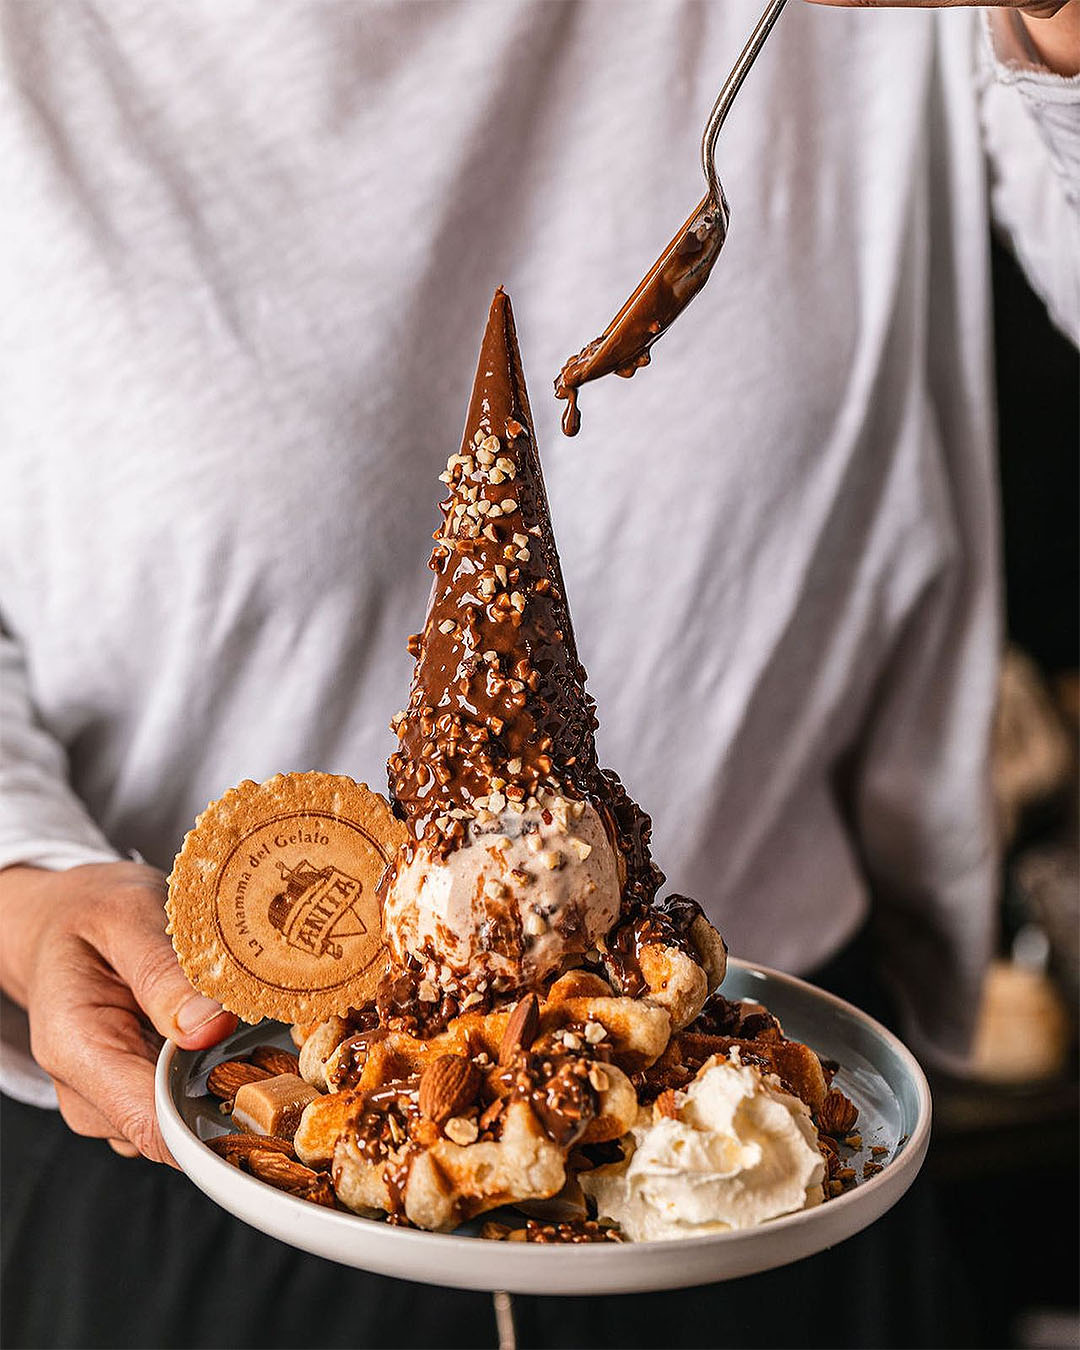 When you order Anita Gelato at Upper Village Queenstown's Belgian waffles you’ll receive two irresistibly fragrant waffles, two scoops of your choice of gelato, Anita’s special chocolate sauce, whipped cream, crushed nuts and your choice of toppings.  